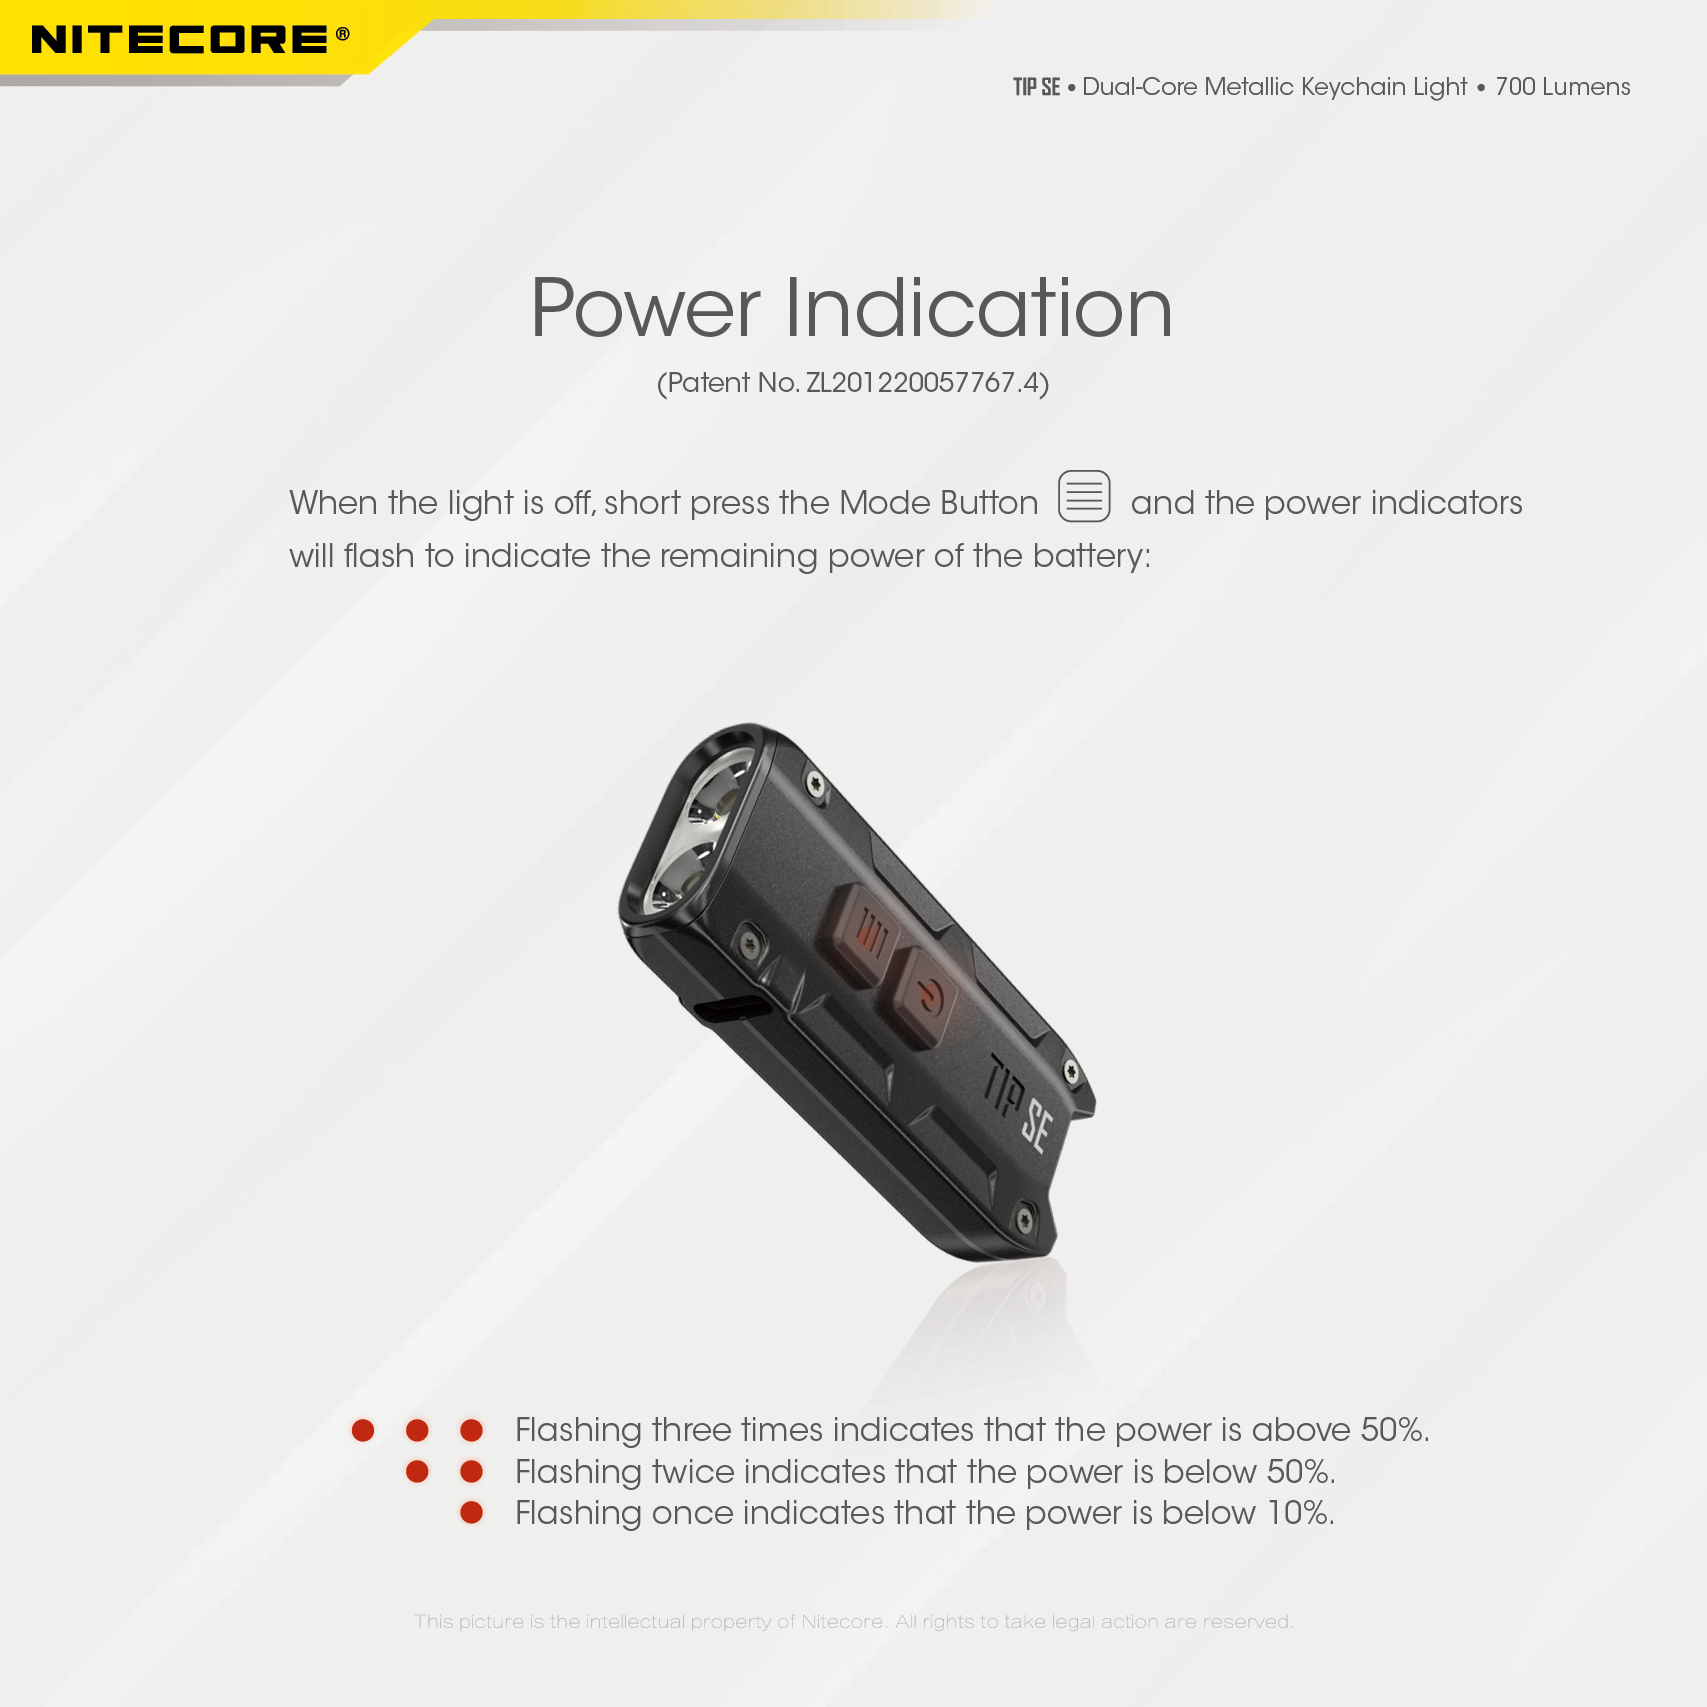 NITECORE-TIP-SE-700LM-P8-Dual-Light-LED-Keychain-Flashlight-Type-C-Rechargeable-QC-Every-Day-Carry-M-1976045-9